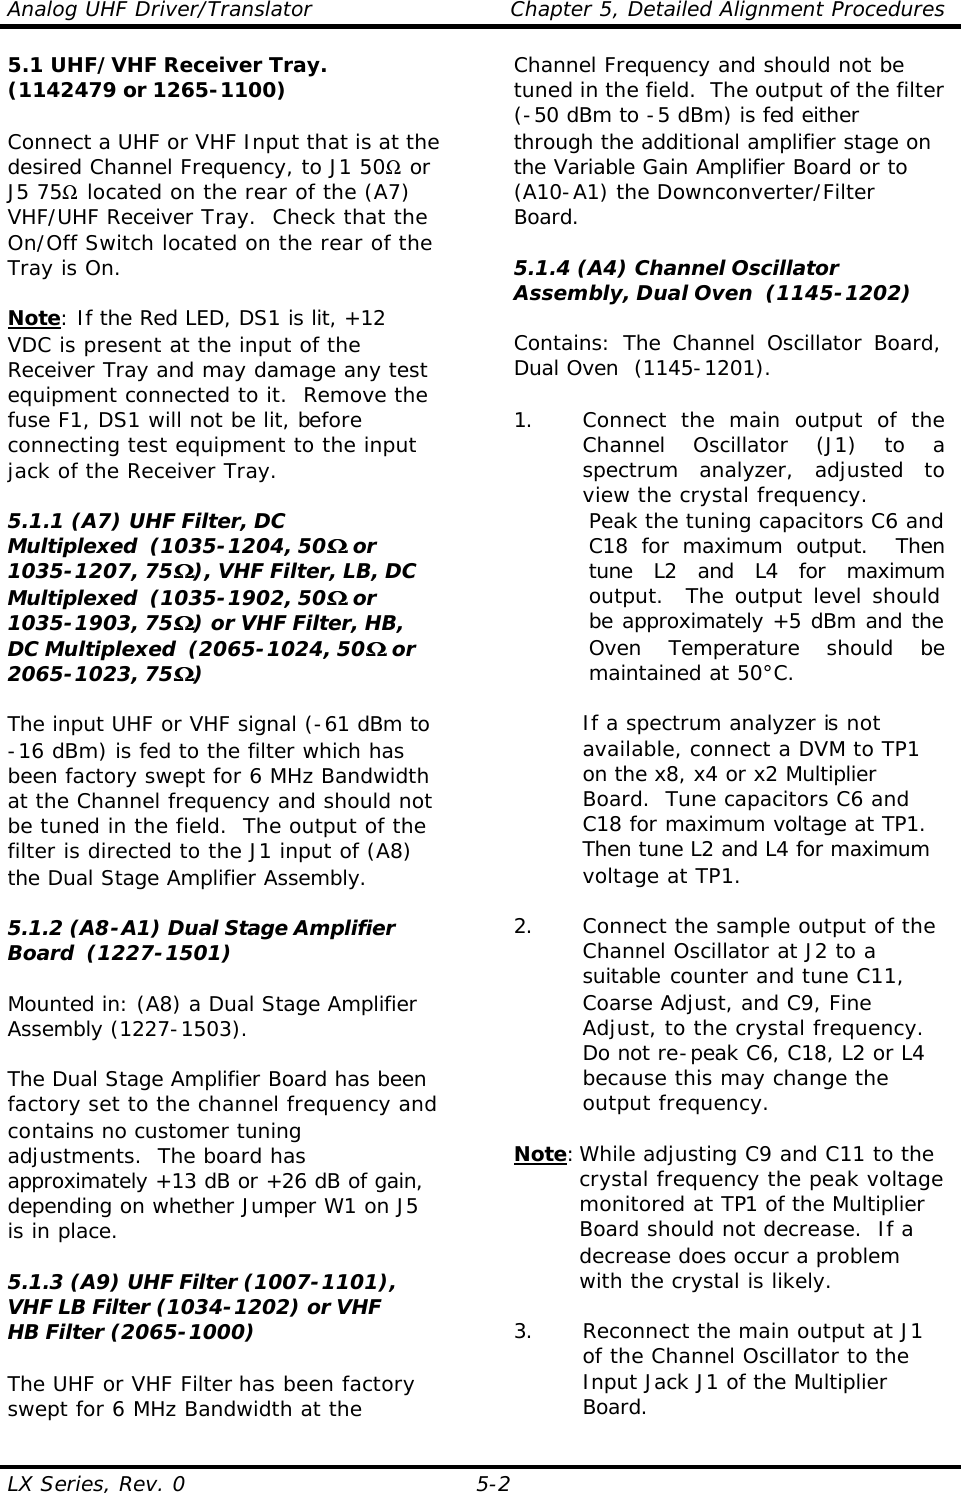 Analog UHF Driver/Translator Chapter 5, Detailed Alignment Procedures  LX Series, Rev. 0 5-2 5.1 UHF/VHF Receiver Tray. (1142479 or 1265-1100)  Connect a UHF or VHF Input that is at the desired Channel Frequency, to J1 50Ω or J5 75Ω located on the rear of the (A7) VHF/UHF Receiver Tray.  Check that the On/Off Switch located on the rear of the Tray is On.  Note: If the Red LED, DS1 is lit, +12 VDC is present at the input of the Receiver Tray and may damage any test equipment connected to it.  Remove the fuse F1, DS1 will not be lit, before connecting test equipment to the input jack of the Receiver Tray.  5.1.1 (A7) UHF Filter, DC Multiplexed  (1035-1204, 50ΩΩ or 1035-1207, 75ΩΩ), VHF Filter, LB, DC Multiplexed  (1035-1902, 50ΩΩ or 1035-1903, 75ΩΩ) or VHF Filter, HB, DC Multiplexed  (2065-1024, 50ΩΩ or 2065-1023, 75ΩΩ)  The input UHF or VHF signal (-61 dBm to -16 dBm) is fed to the filter which has been factory swept for 6 MHz Bandwidth at the Channel frequency and should not be tuned in the field.  The output of the filter is directed to the J1 input of (A8) the Dual Stage Amplifier Assembly.  5.1.2 (A8-A1) Dual Stage Amplifier Board  (1227-1501)  Mounted in: (A8) a Dual Stage Amplifier Assembly (1227-1503).  The Dual Stage Amplifier Board has been factory set to the channel frequency and contains no customer tuning adjustments.  The board has approximately +13 dB or +26 dB of gain, depending on whether Jumper W1 on J5 is in place.  5.1.3 (A9) UHF Filter (1007-1101), VHF LB Filter (1034-1202) or VHF HB Filter (2065-1000)  The UHF or VHF Filter has been factory swept for 6 MHz Bandwidth at the Channel Frequency and should not be tuned in the field.  The output of the filter (-50 dBm to -5 dBm) is fed either through the additional amplifier stage on the Variable Gain Amplifier Board or to (A10-A1) the Downconverter/Filter Board.  5.1.4 (A4) Channel Oscillator Assembly, Dual Oven  (1145-1202)  Contains: The Channel Oscillator Board, Dual Oven  (1145-1201).  1. Connect the main output of the Channel Oscillator (J1) to a spectrum analyzer, adjusted to view the crystal frequency. Peak the tuning capacitors C6 and C18 for maximum output.  Then tune L2 and L4 for maximum output.  The output level should be approximately +5 dBm and the Oven Temperature should be maintained at 50°C.   If a spectrum analyzer is not available, connect a DVM to TP1 on the x8, x4 or x2 Multiplier Board.  Tune capacitors C6 and C18 for maximum voltage at TP1.  Then tune L2 and L4 for maximum voltage at TP1.  2. Connect the sample output of the Channel Oscillator at J2 to a suitable counter and tune C11, Coarse Adjust, and C9, Fine Adjust, to the crystal frequency.  Do not re-peak C6, C18, L2 or L4 because this may change the output frequency.  Note: While adjusting C9 and C11 to the crystal frequency the peak voltage monitored at TP1 of the Multiplier Board should not decrease.  If a decrease does occur a problem with the crystal is likely.   3. Reconnect the main output at J1 of the Channel Oscillator to the Input Jack J1 of the Multiplier Board. 